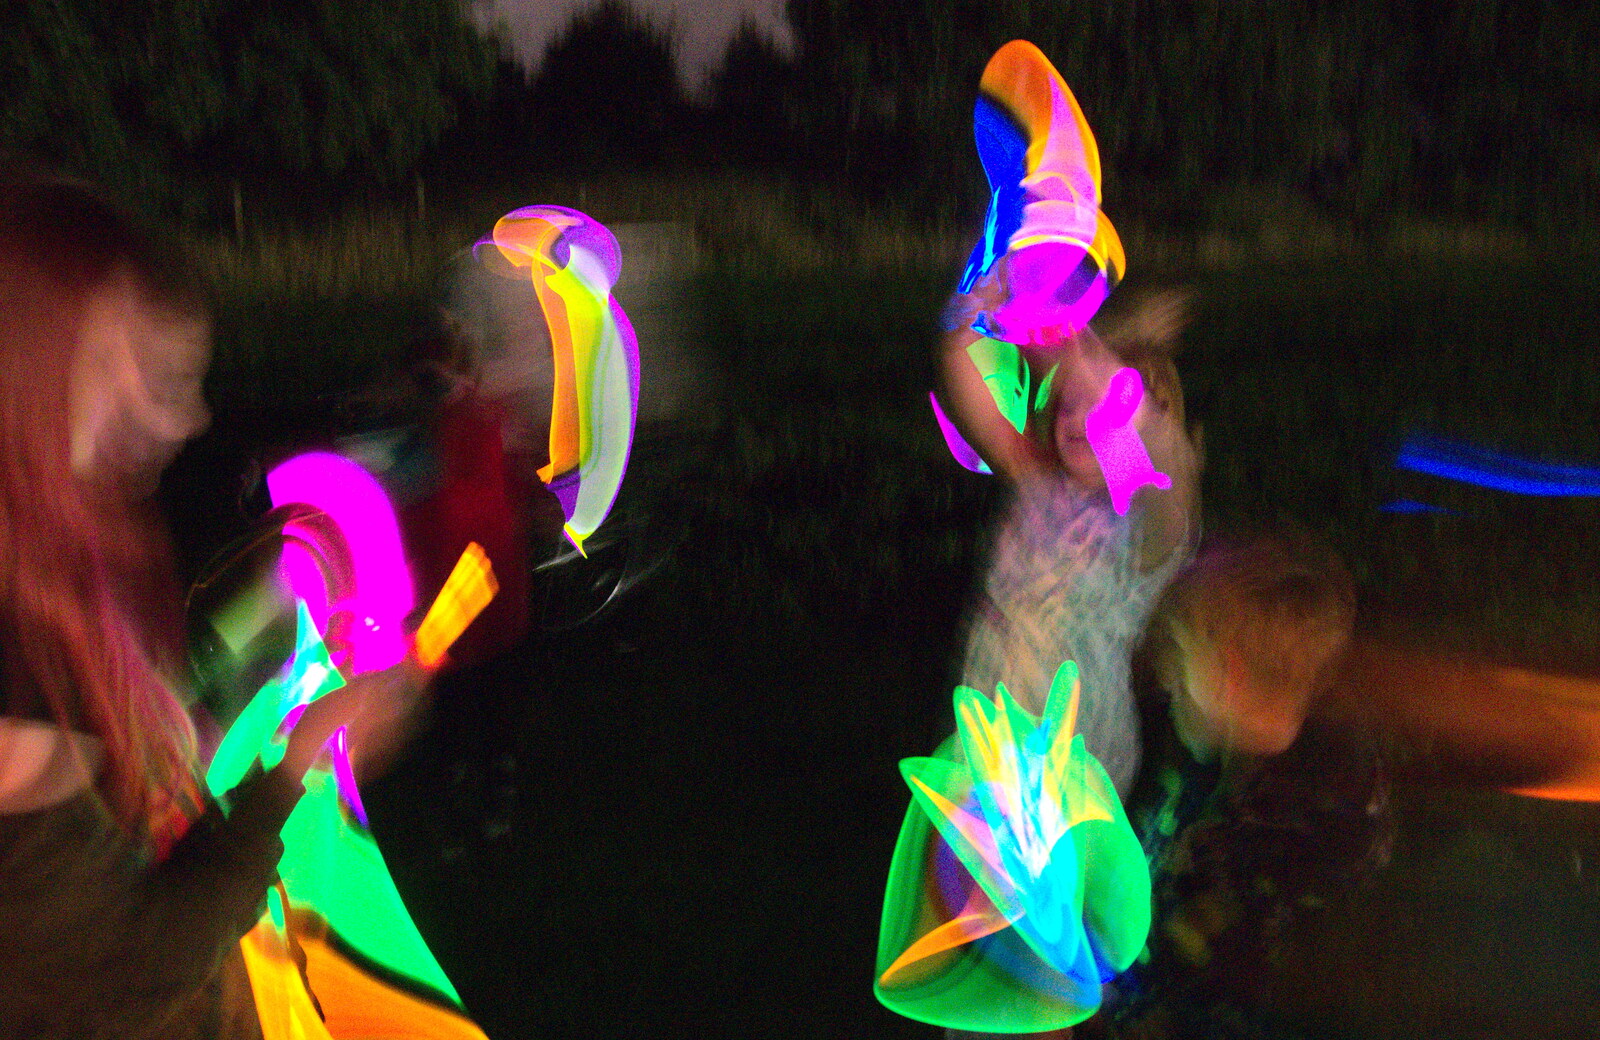 There's lots of fun with glowsticks in the dark from A Spot of Camping, Alton Water, Stutton, Suffolk - 1st September 2018